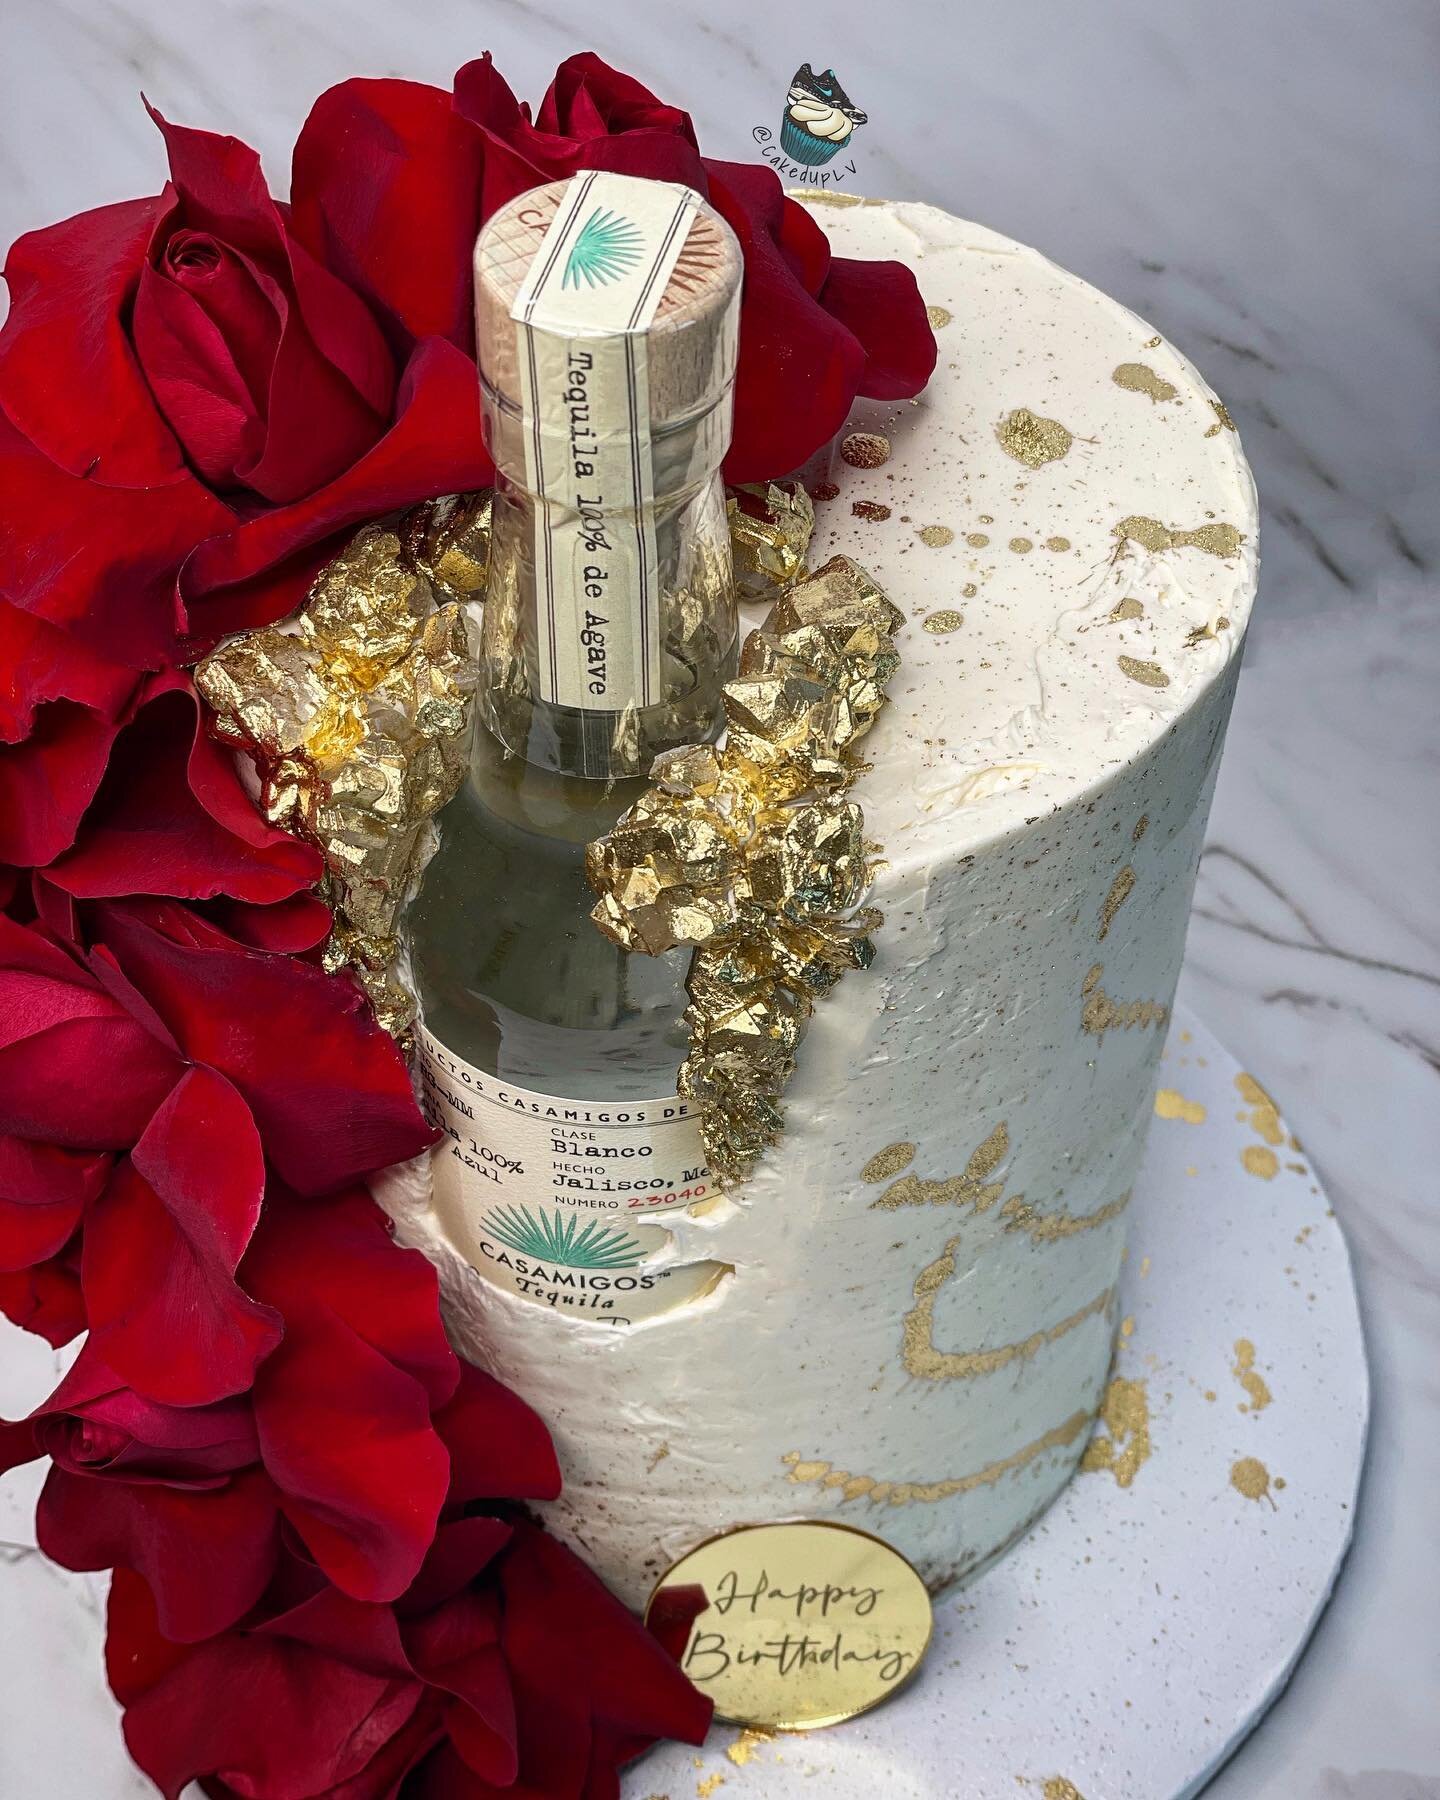 Casamigos is the best tasting tequila hands down. It has hints of vanilla so it pairs perfectly with cake!

&bull;

Cuban Link &mdash; @sprinklesbygcc 
Cake Charm &mdash; @happyhourslv